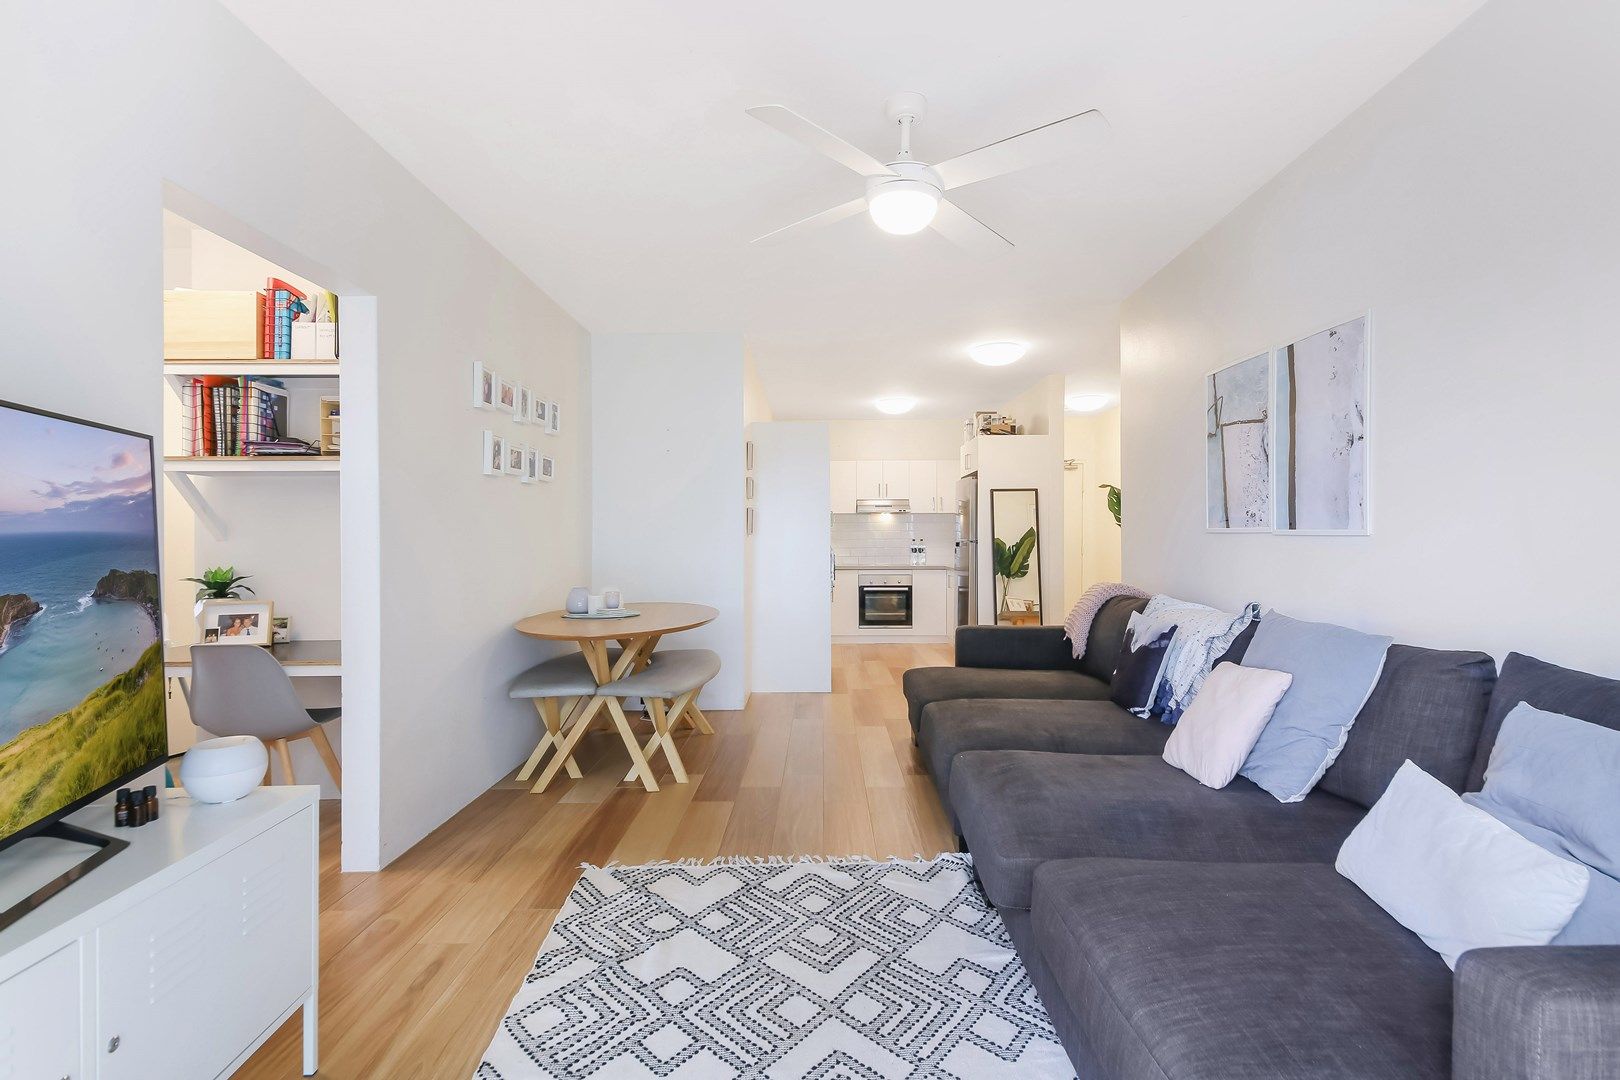 2 bedrooms Apartment / Unit / Flat in 18/364 Livingstone Road MARRICKVILLE NSW, 2204